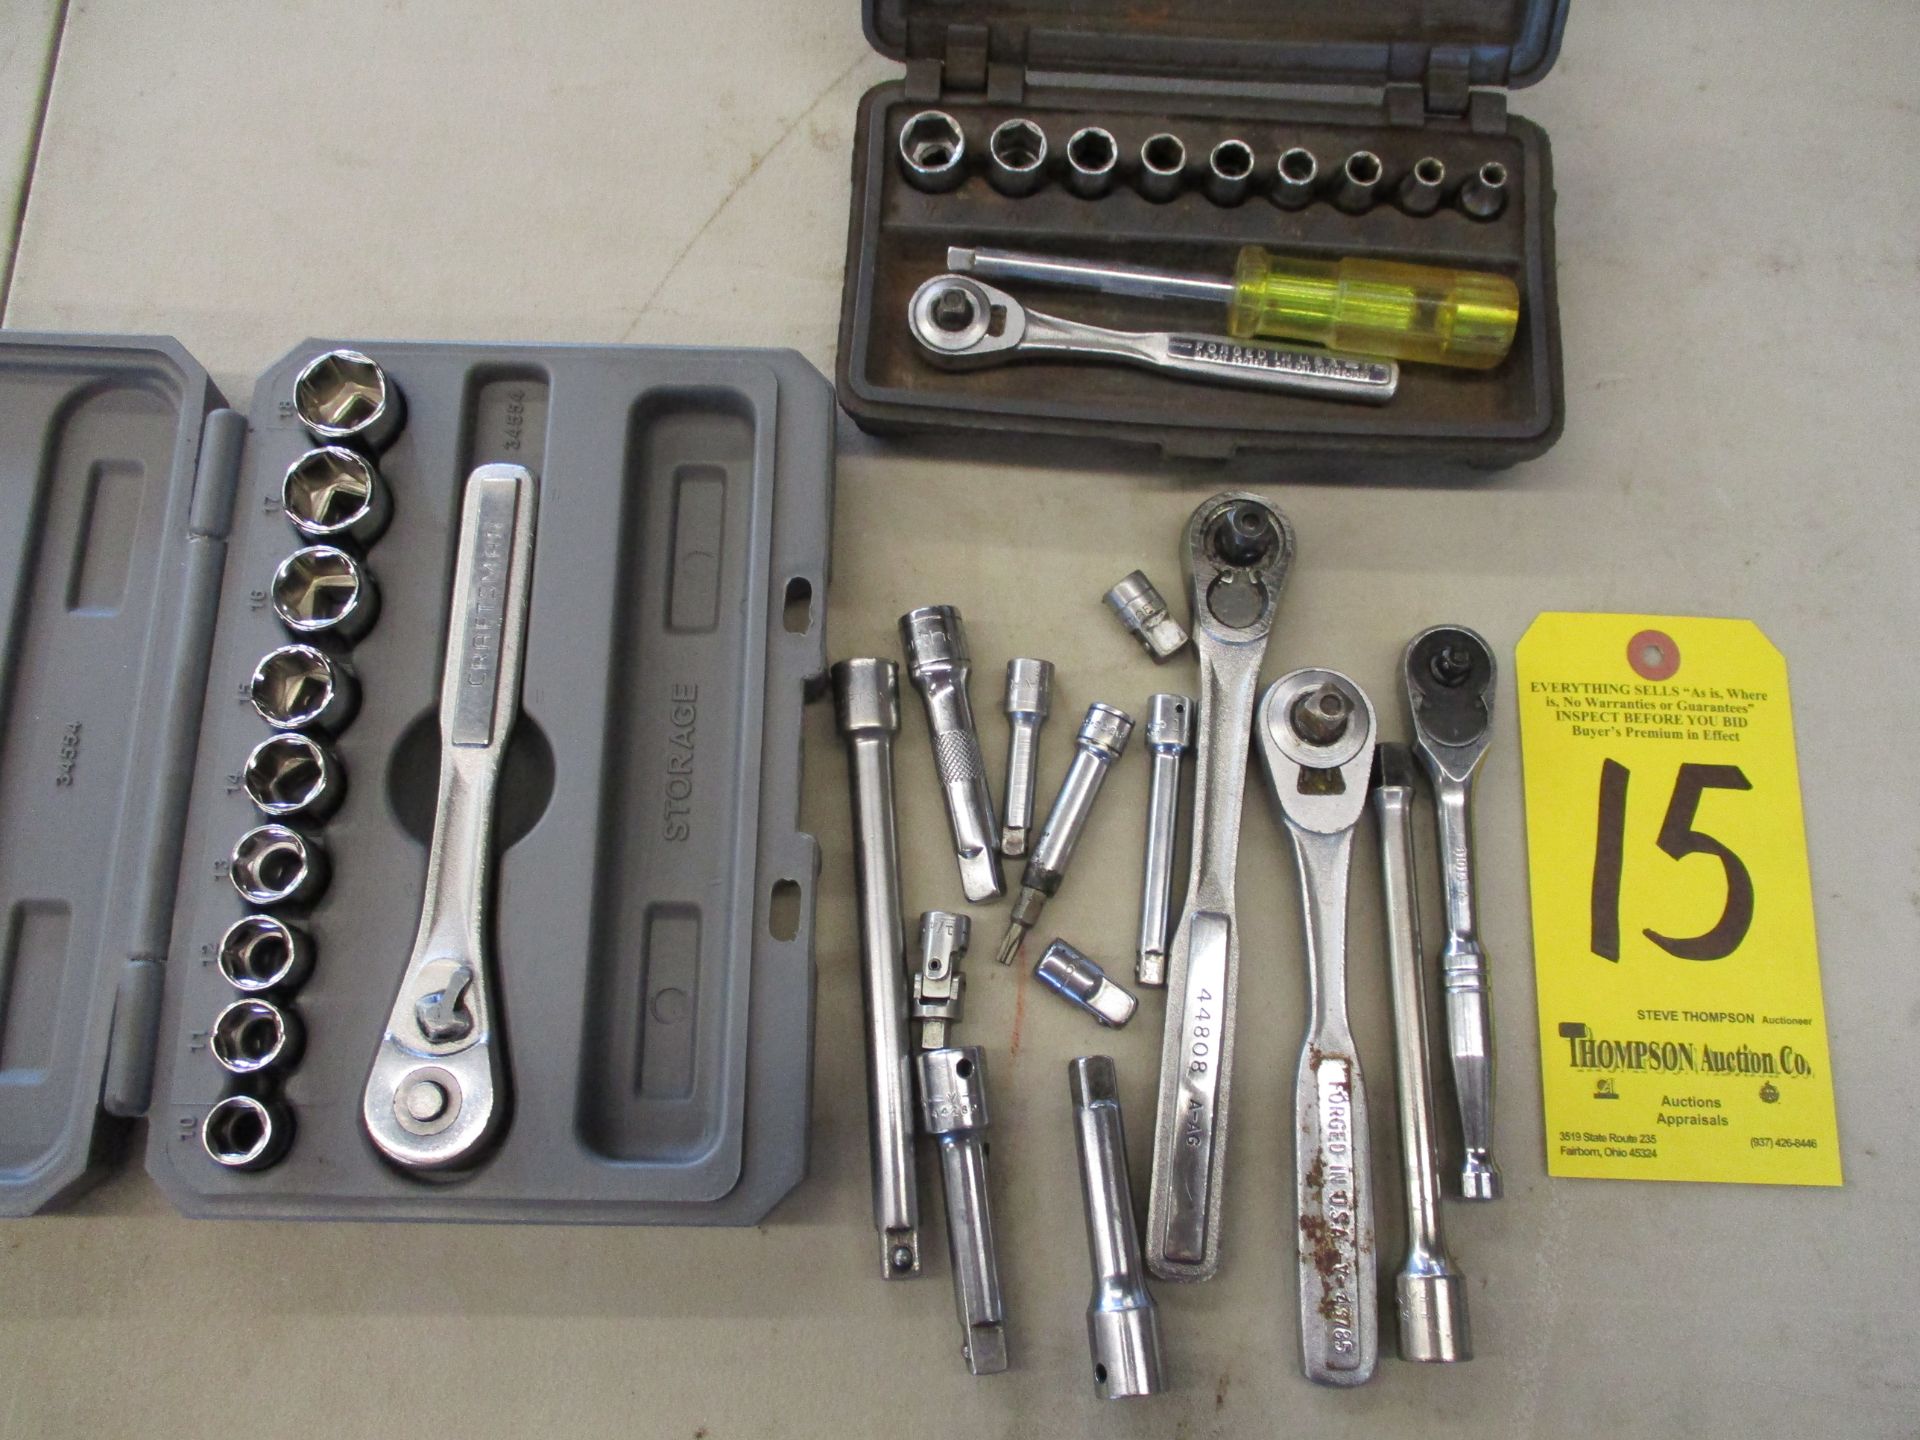 Craftsman Ratchet and Socket Sets, Misc. Ratchets and Extensions